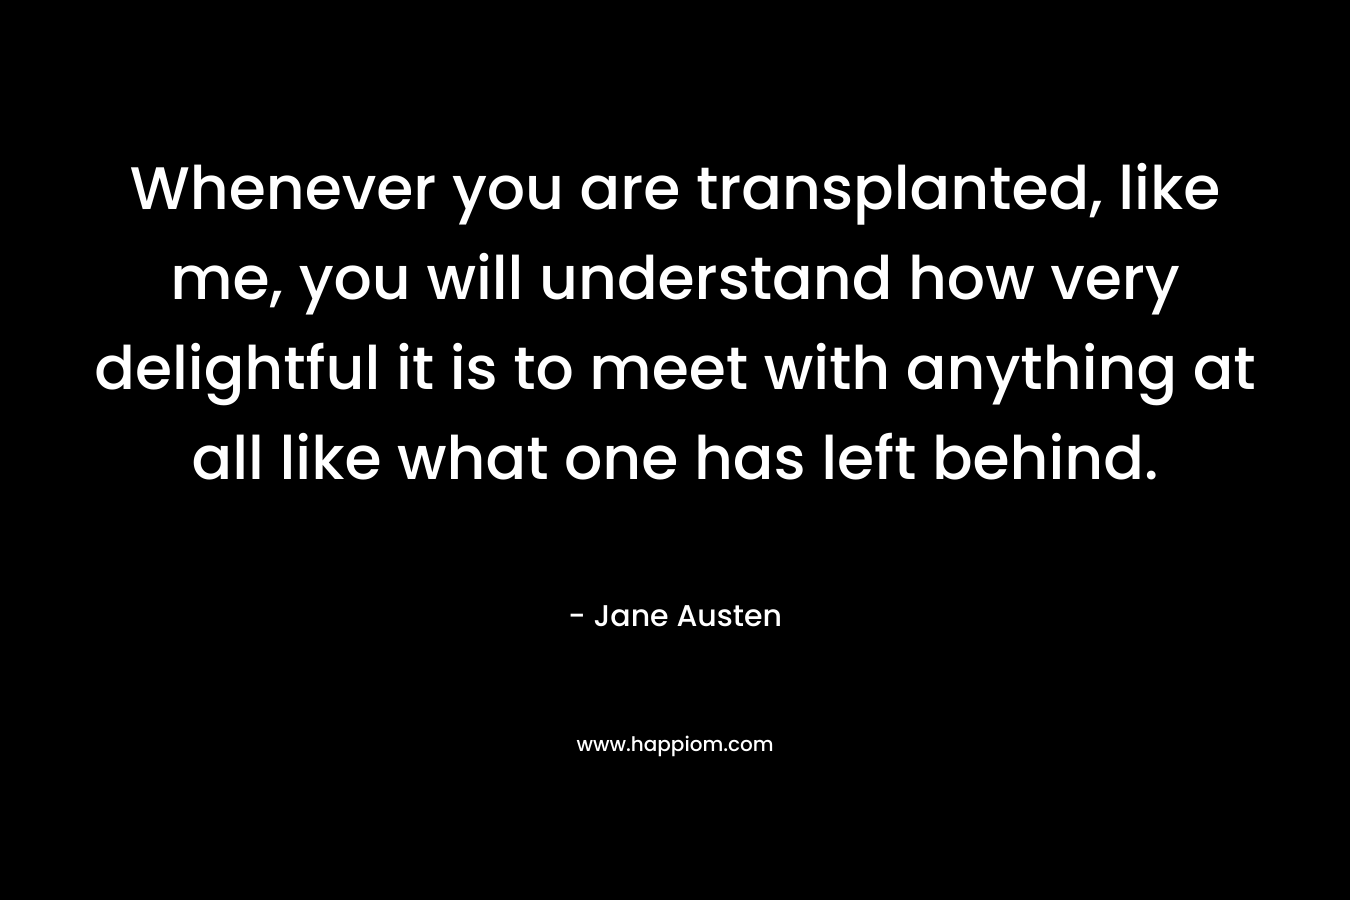 Whenever you are transplanted, like me, you will understand how very delightful it is to meet with anything at all like what one has left behind. – Jane Austen